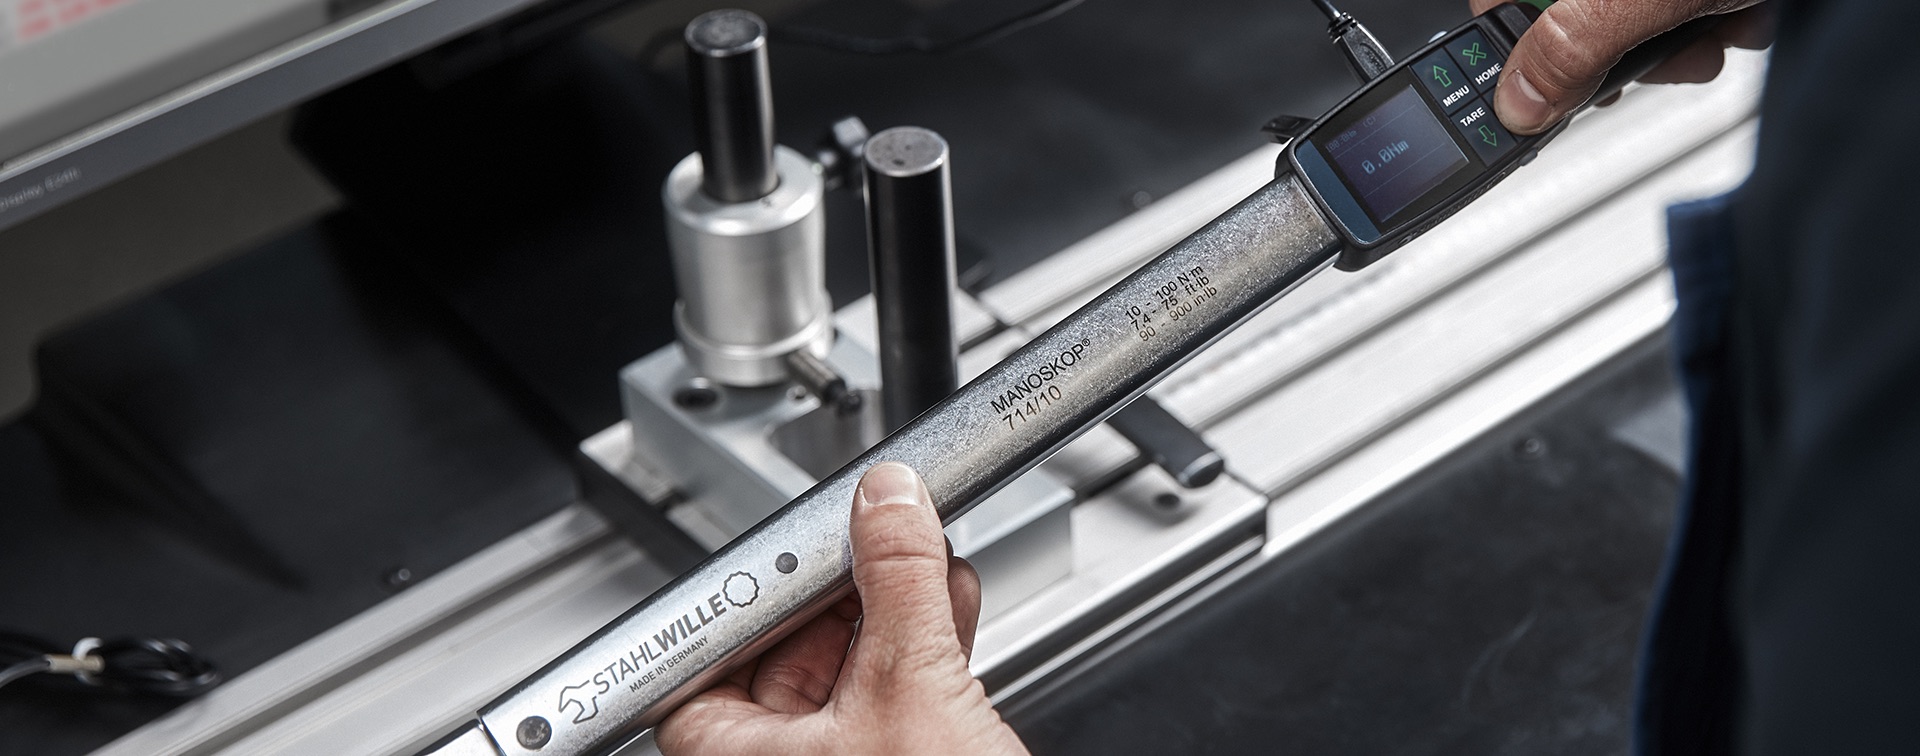 A STAHLWILLE torque wrench is calibrated